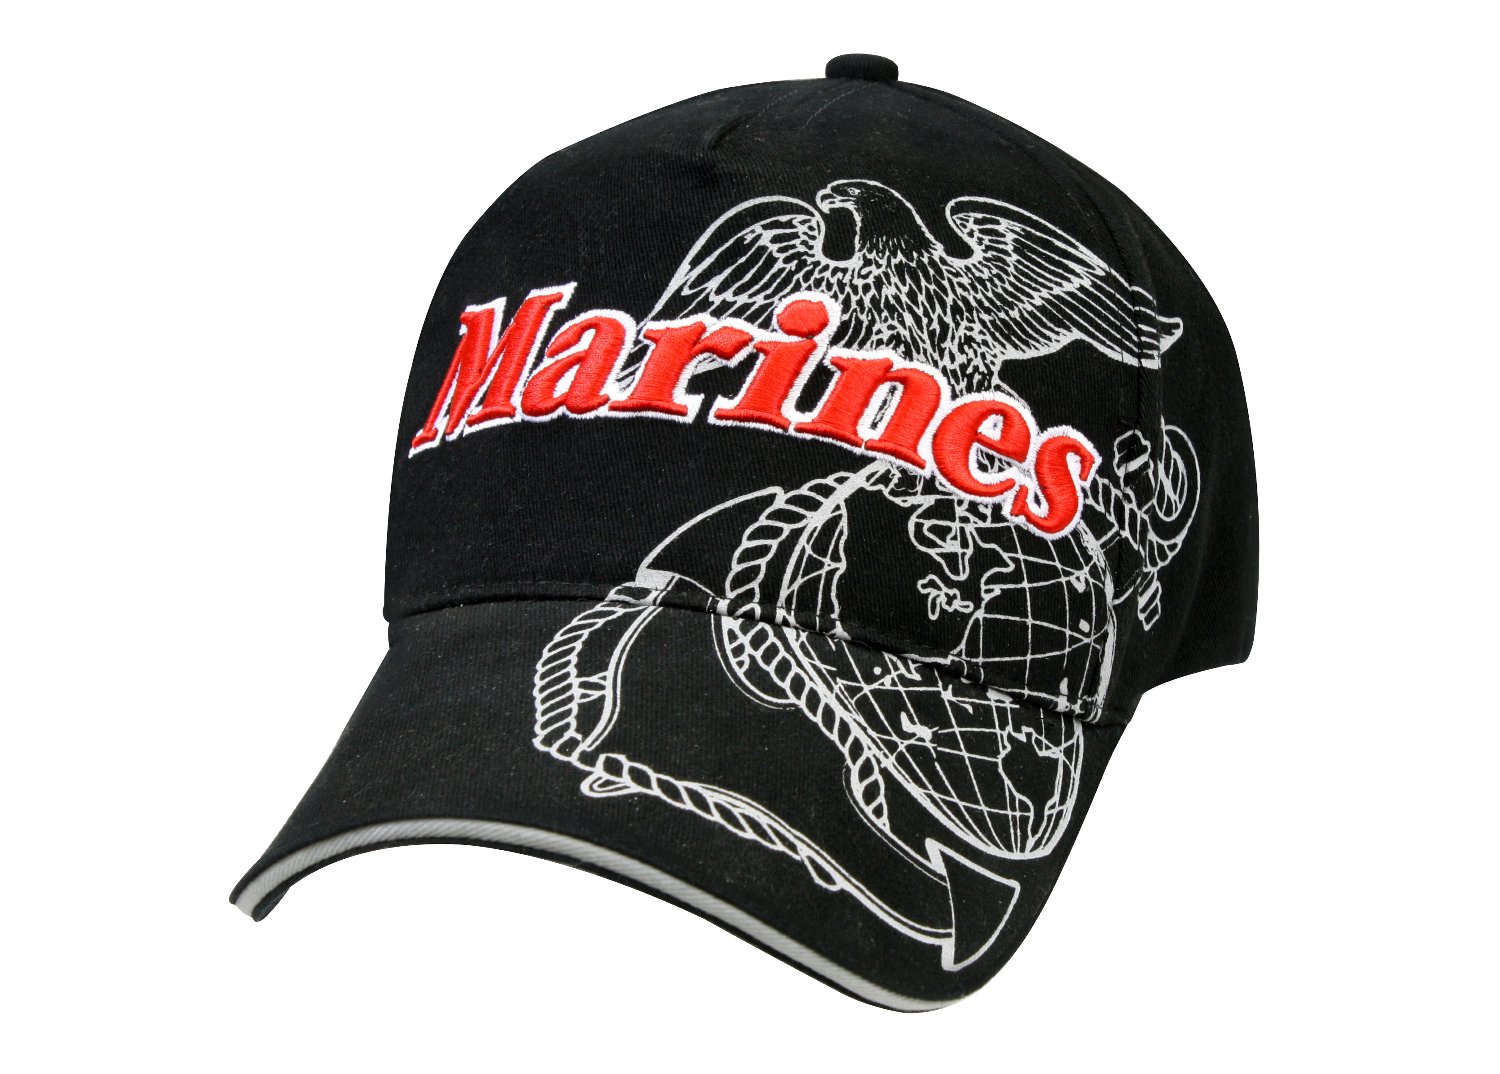 Rothco Deluxe Marines Eagle, Globe & Anchor Low Pro Cap